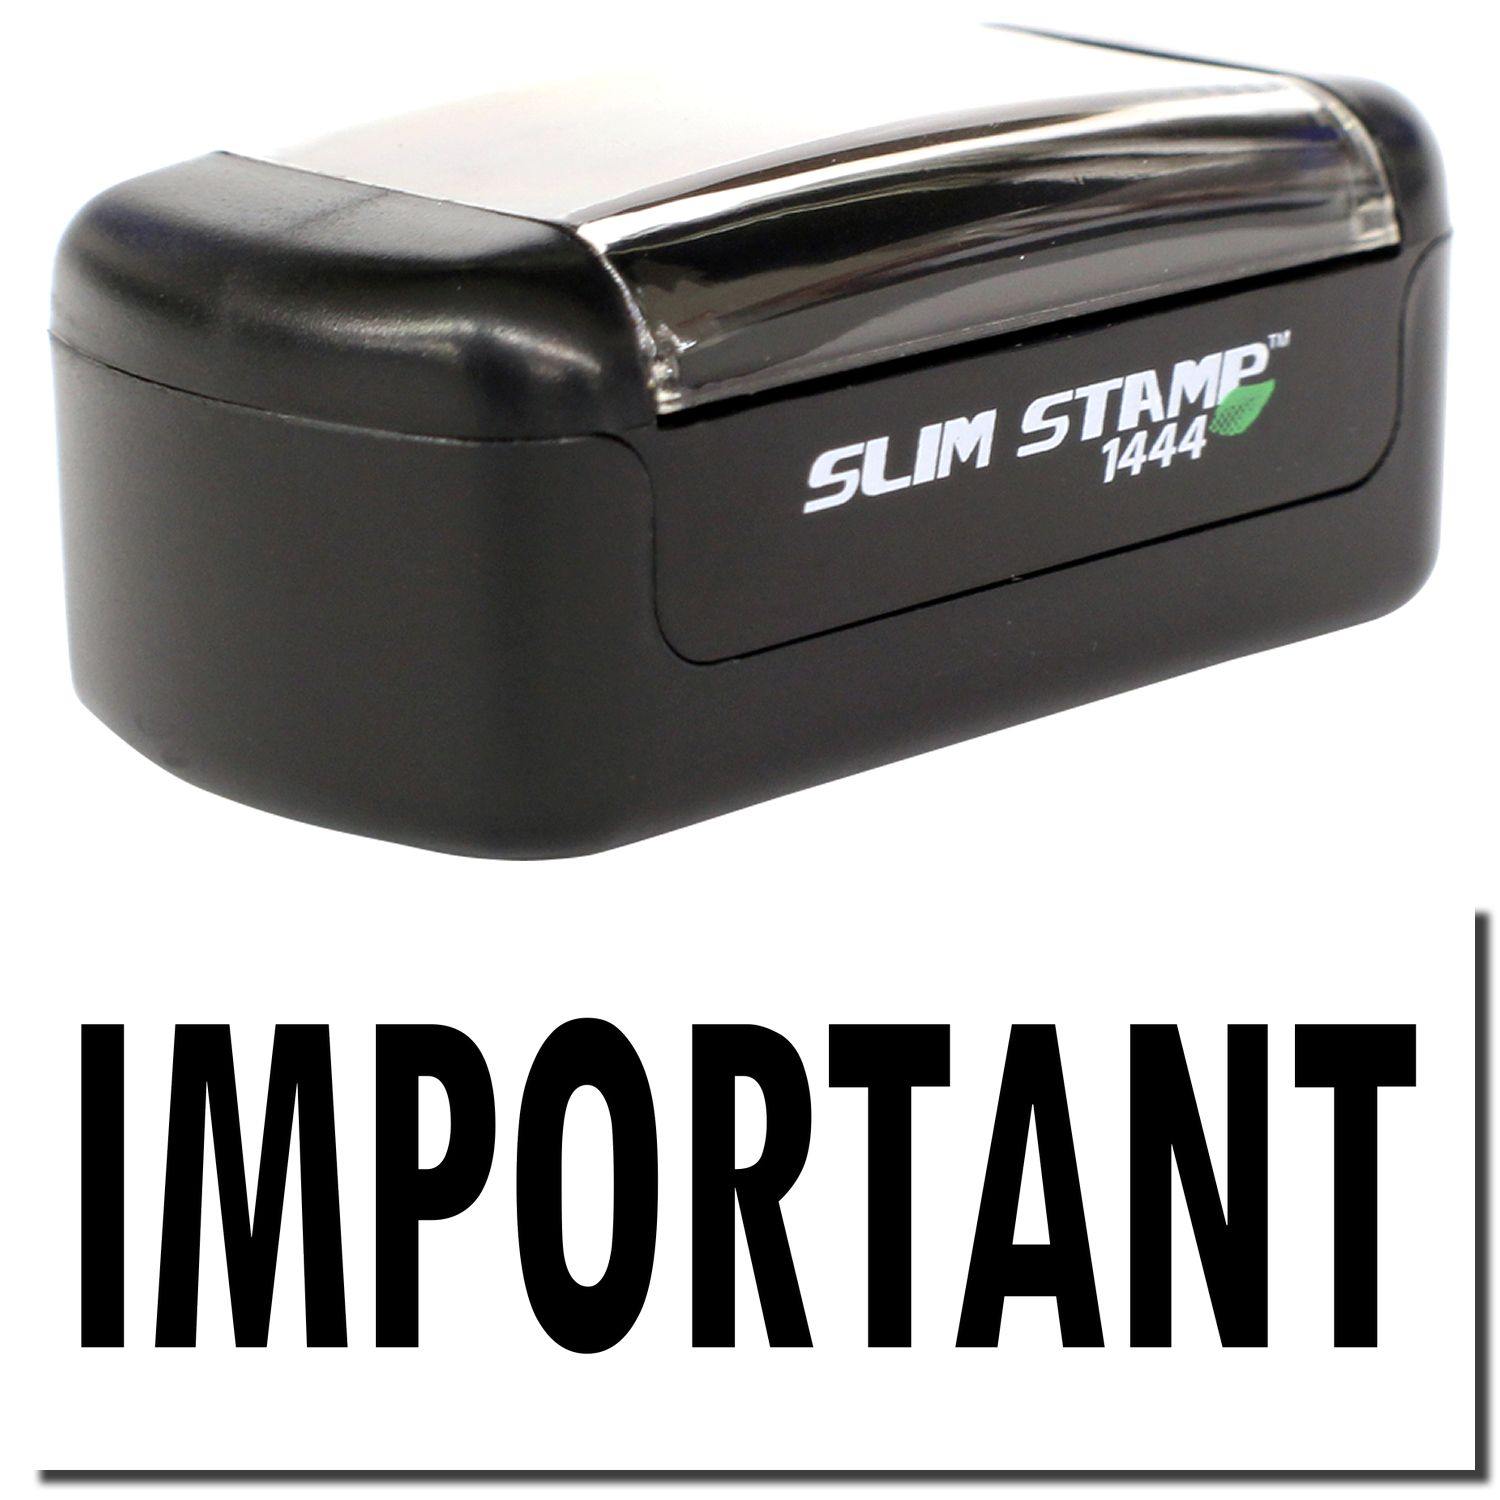 A stock office pre-inked stamp with a stamped image showing how the text "IMPORTANT" is displayed after stamping.